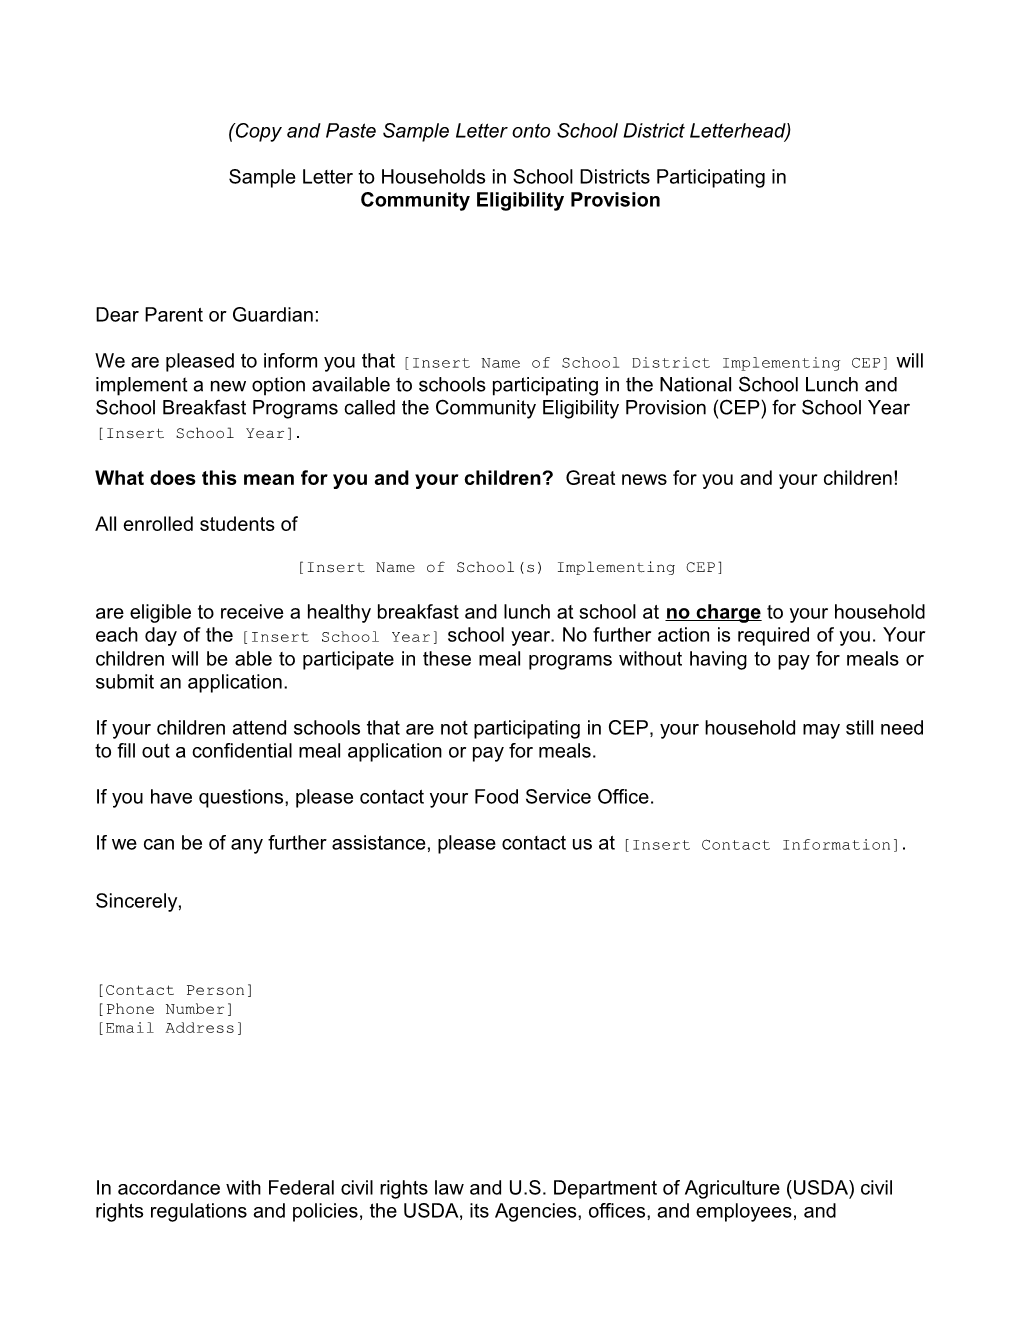 Sample Letter to Households for CEO Schools/Districts